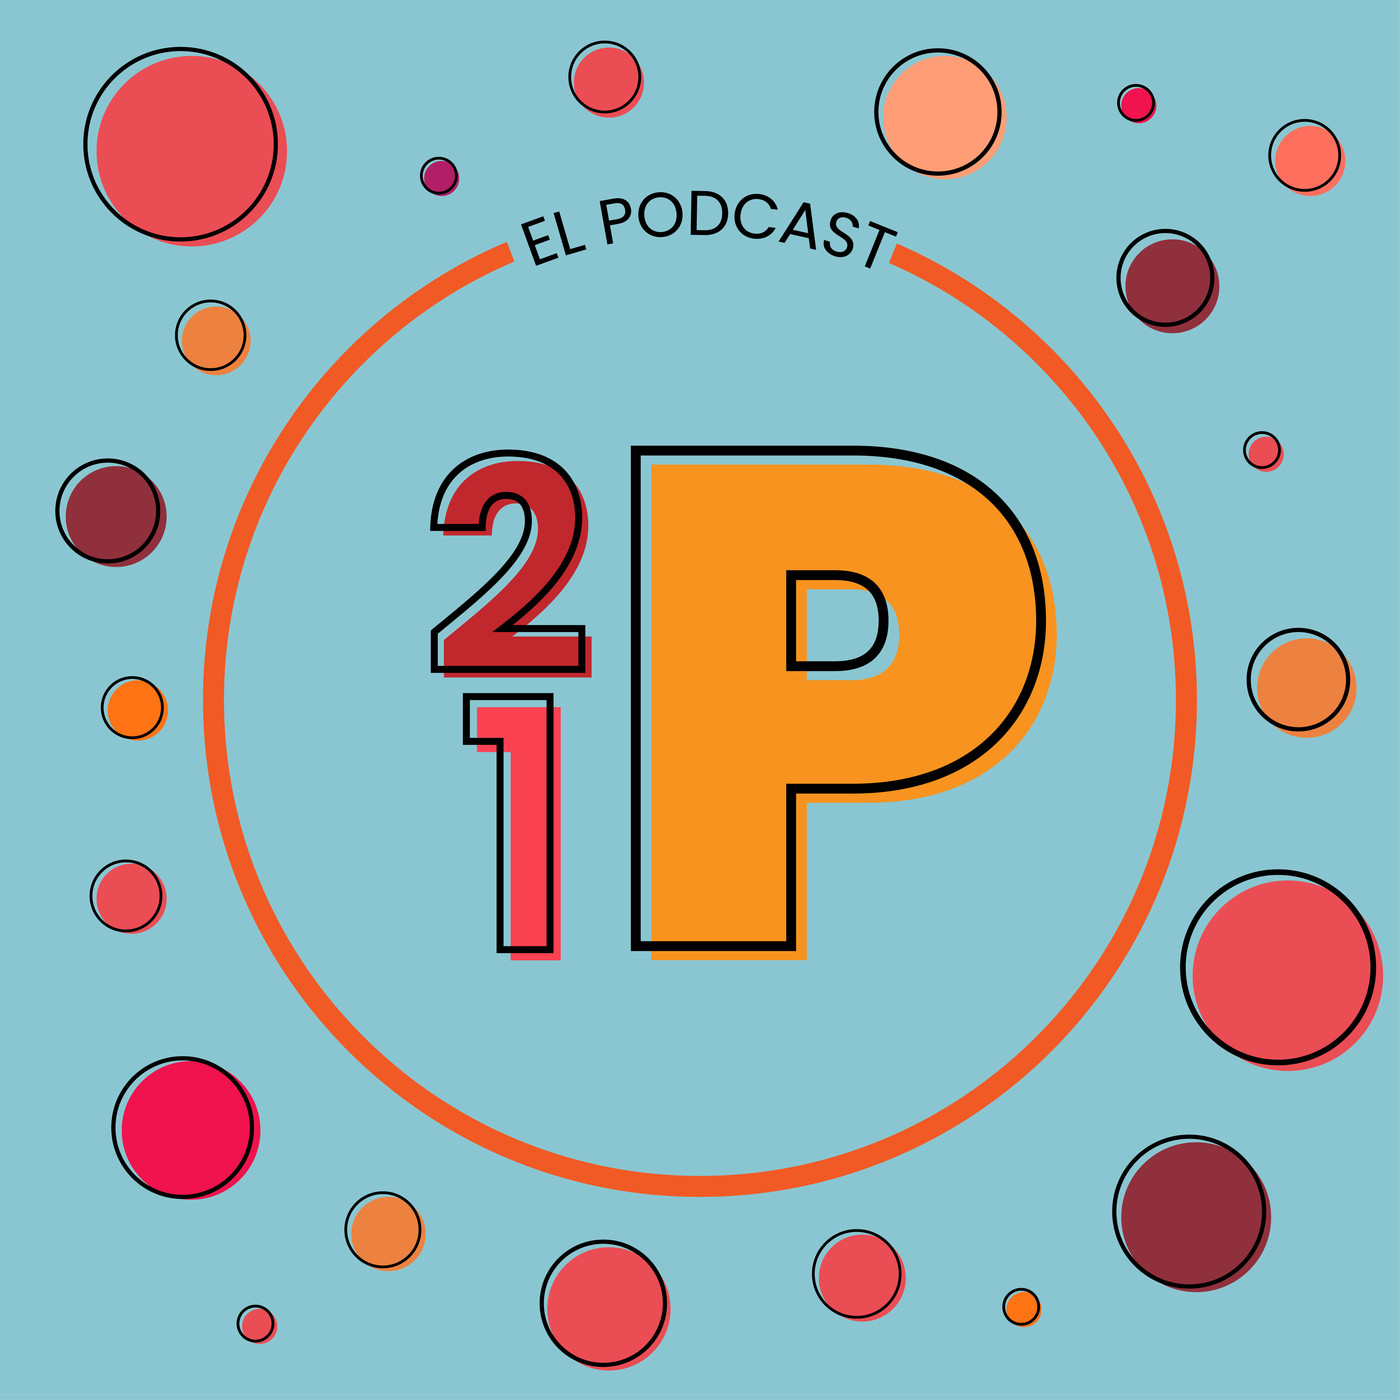 2 Pendejos 1 Podcast